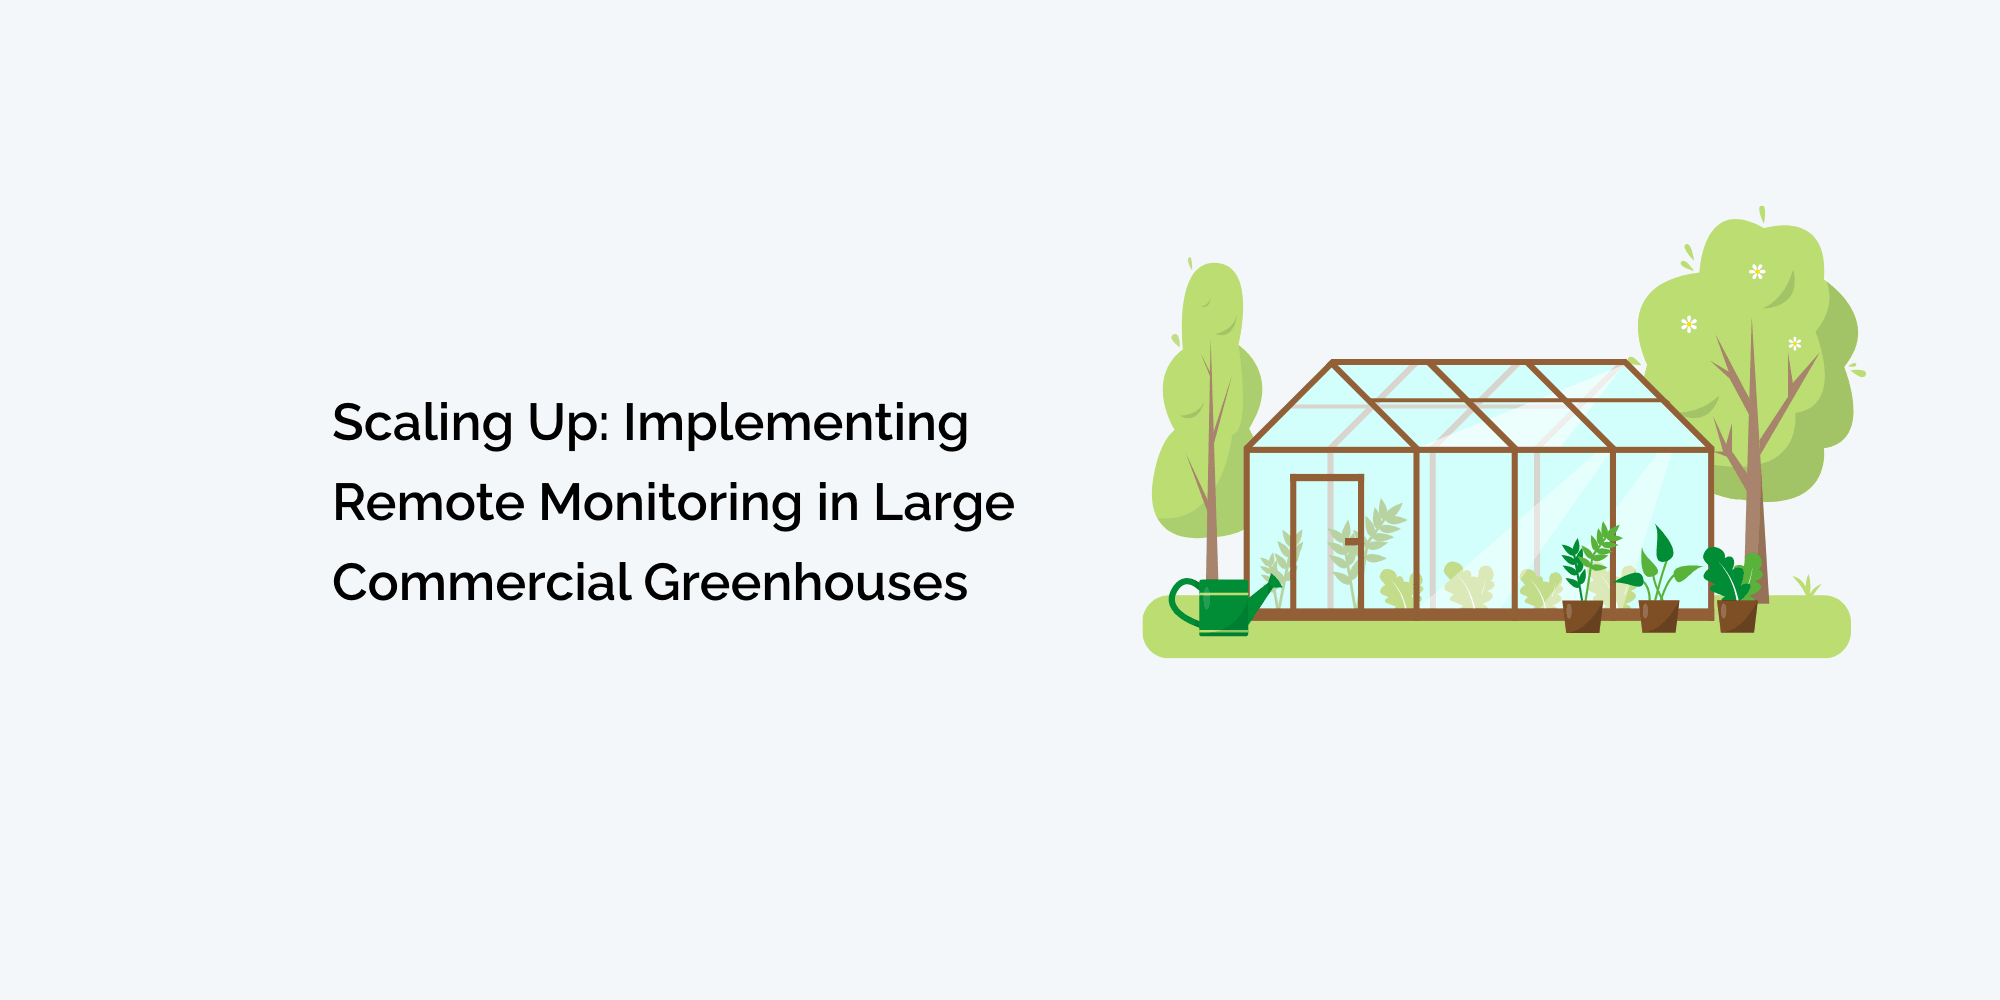 Scaling Up: Implementing Remote Monitoring in Large Commercial Greenhouses